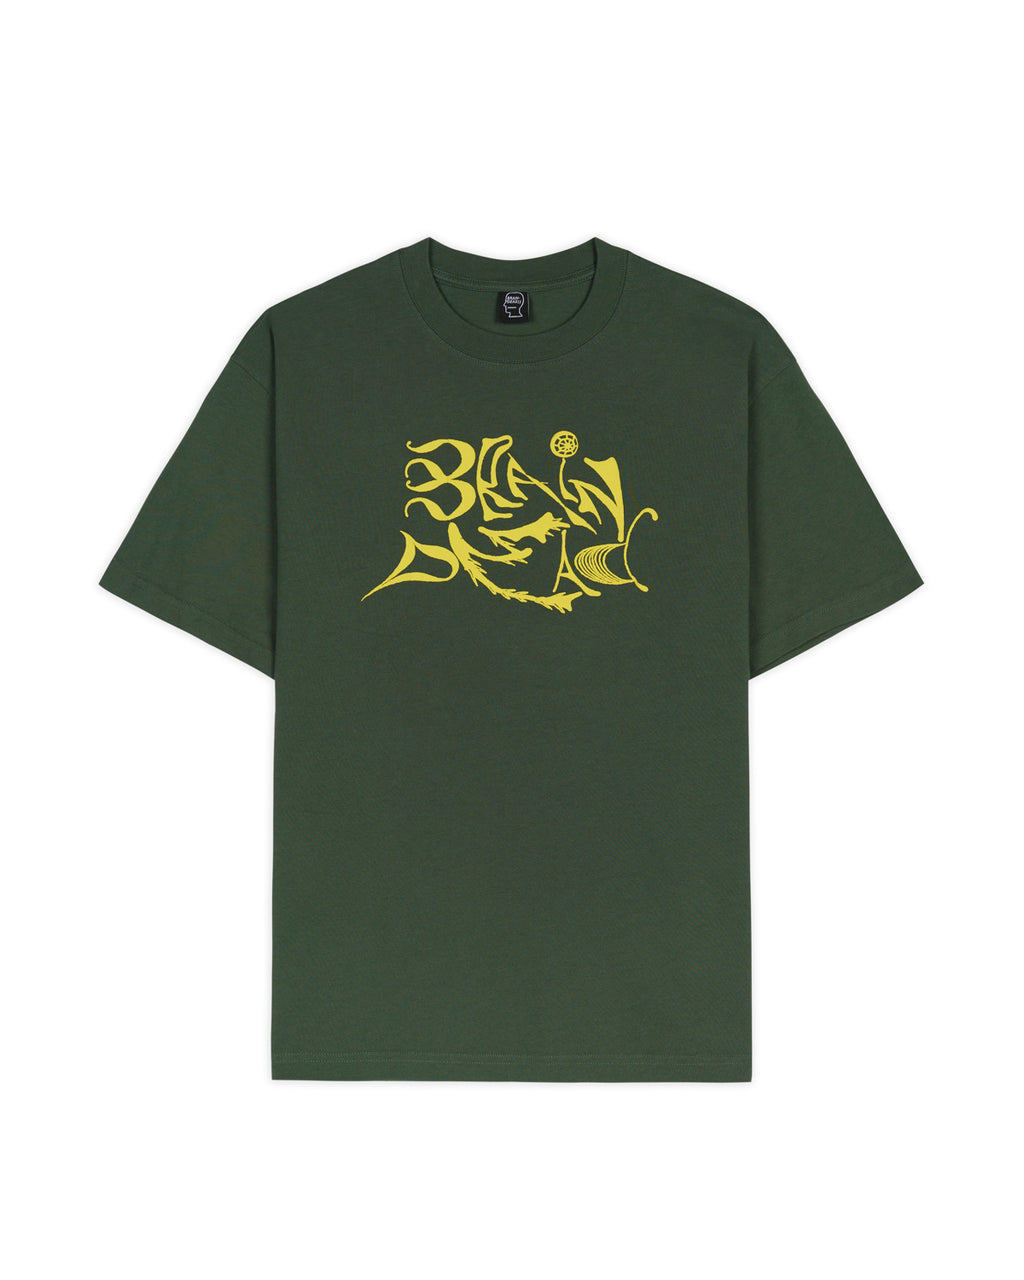 New Age T-shirt - Green